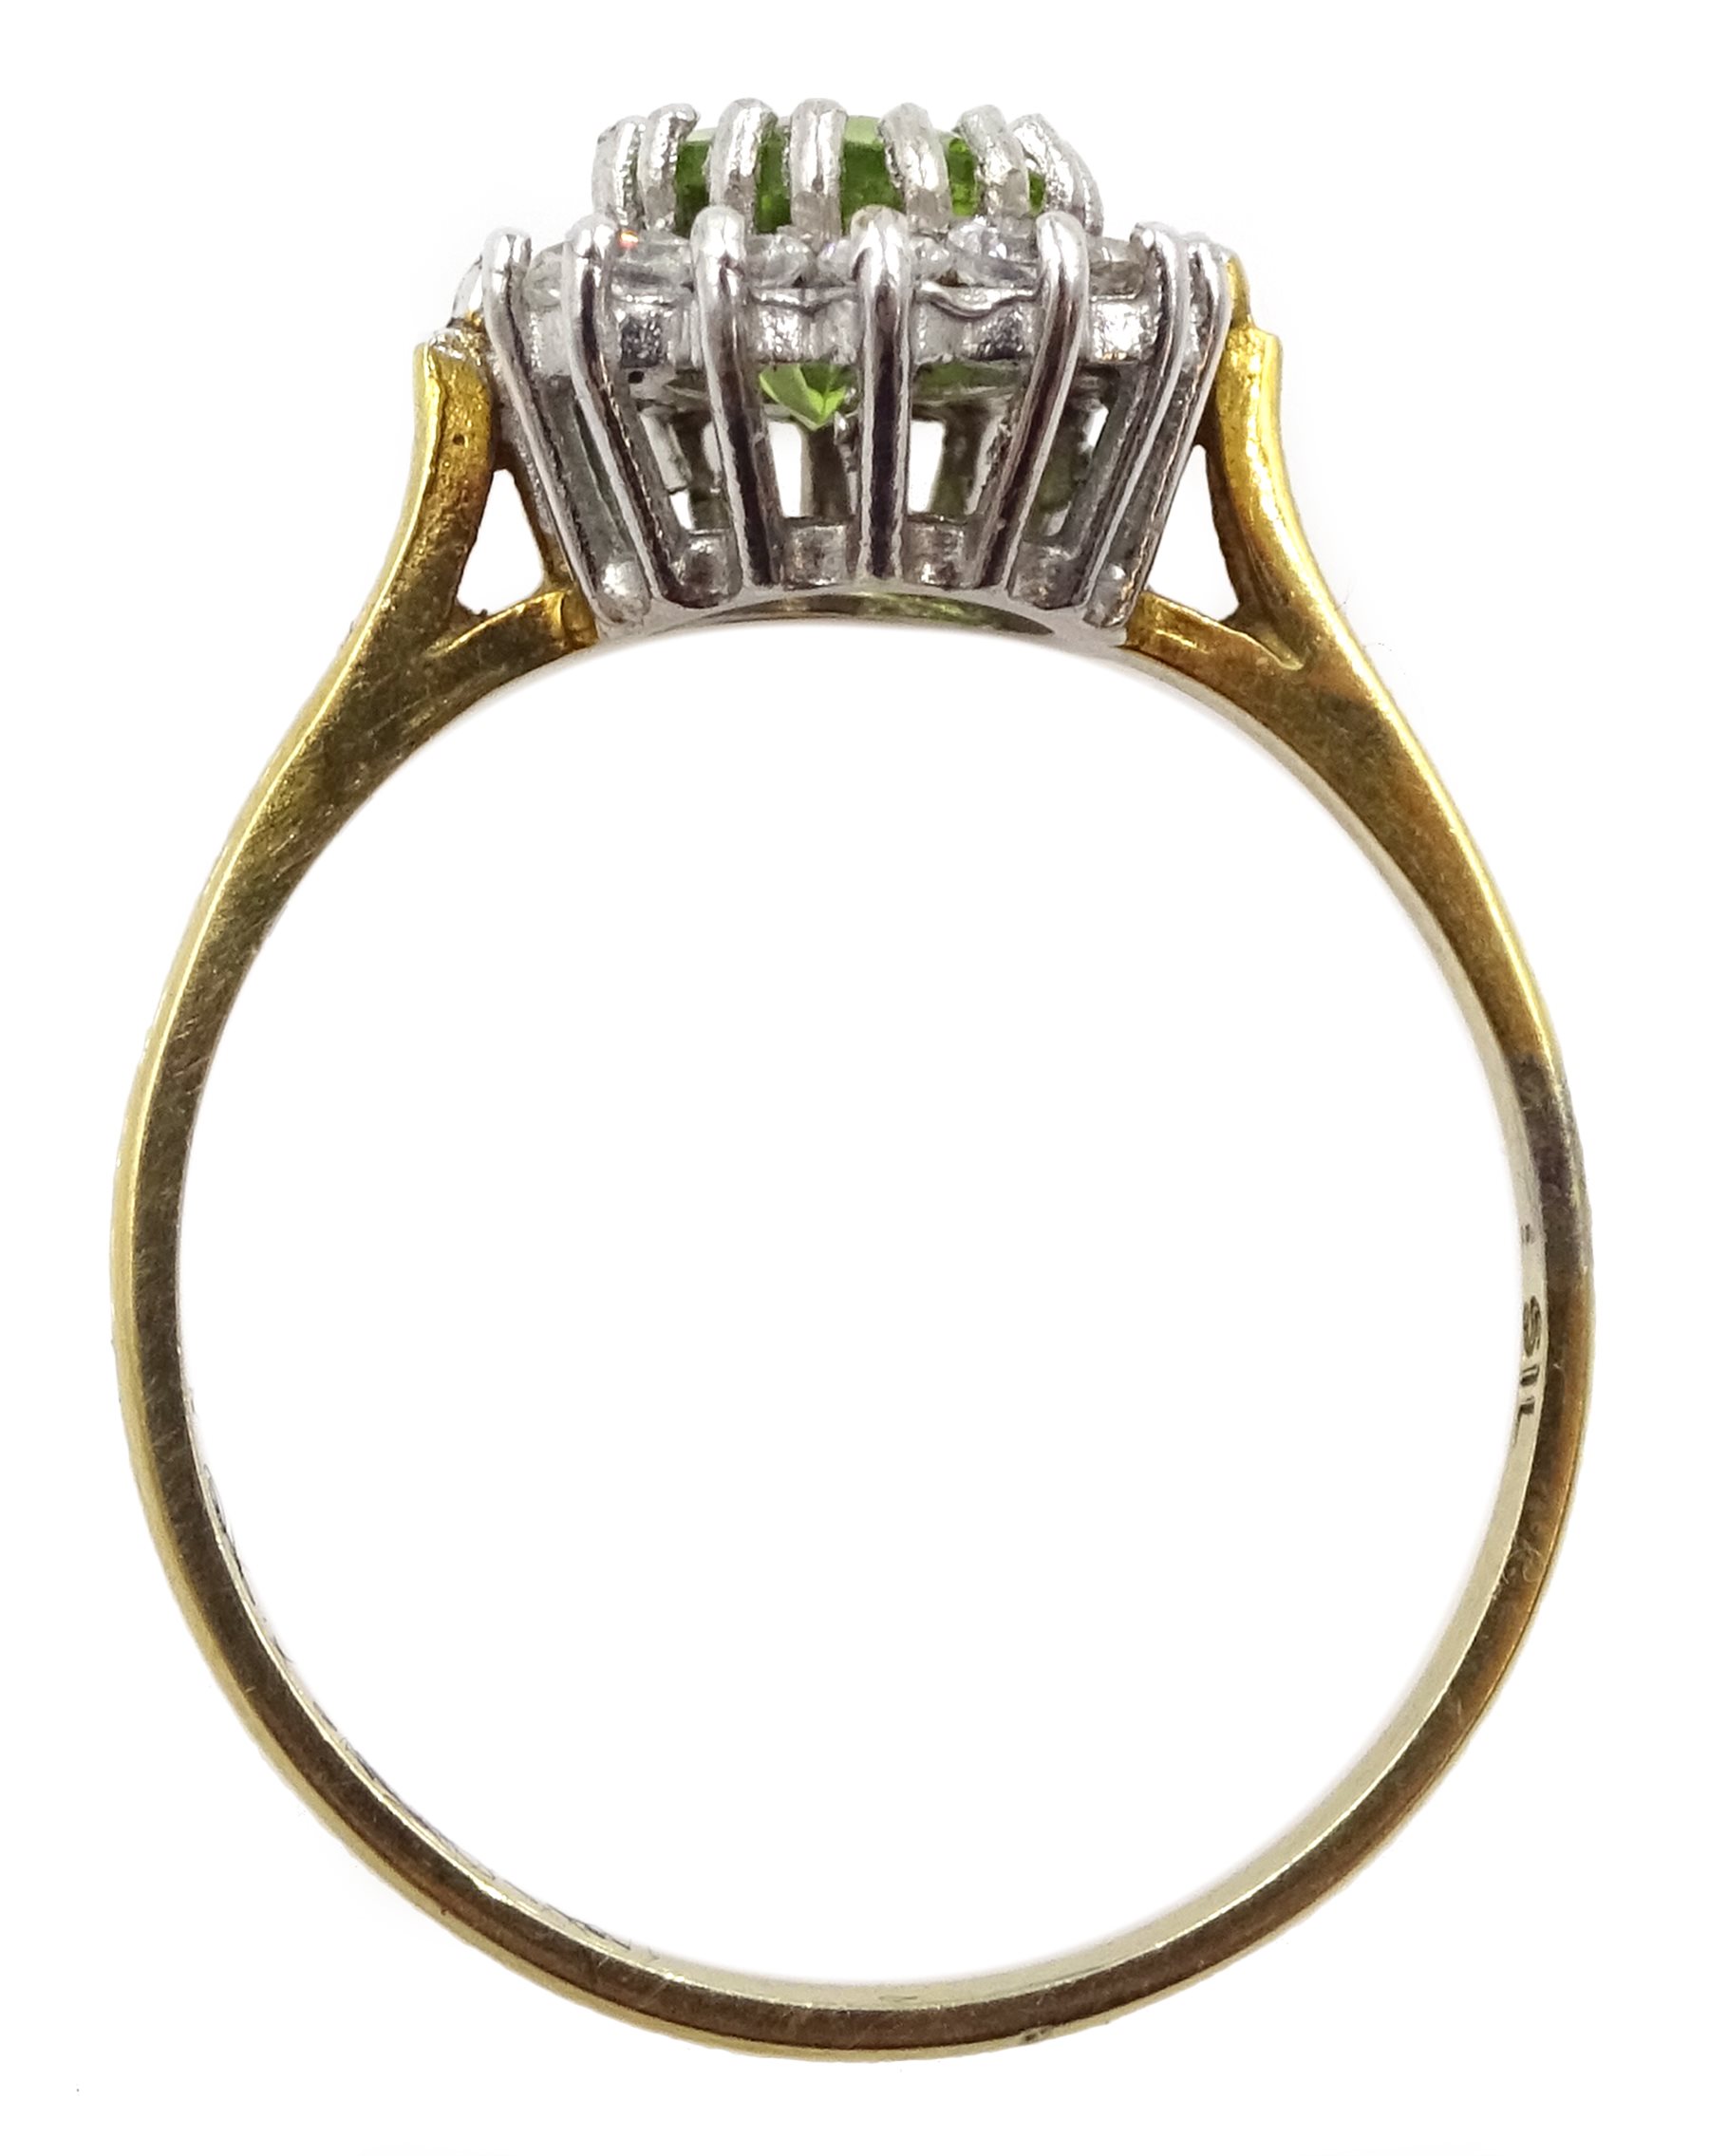 Silver-gilt peridot and cubic zirconia ring, stamped Sil - Image 3 of 5